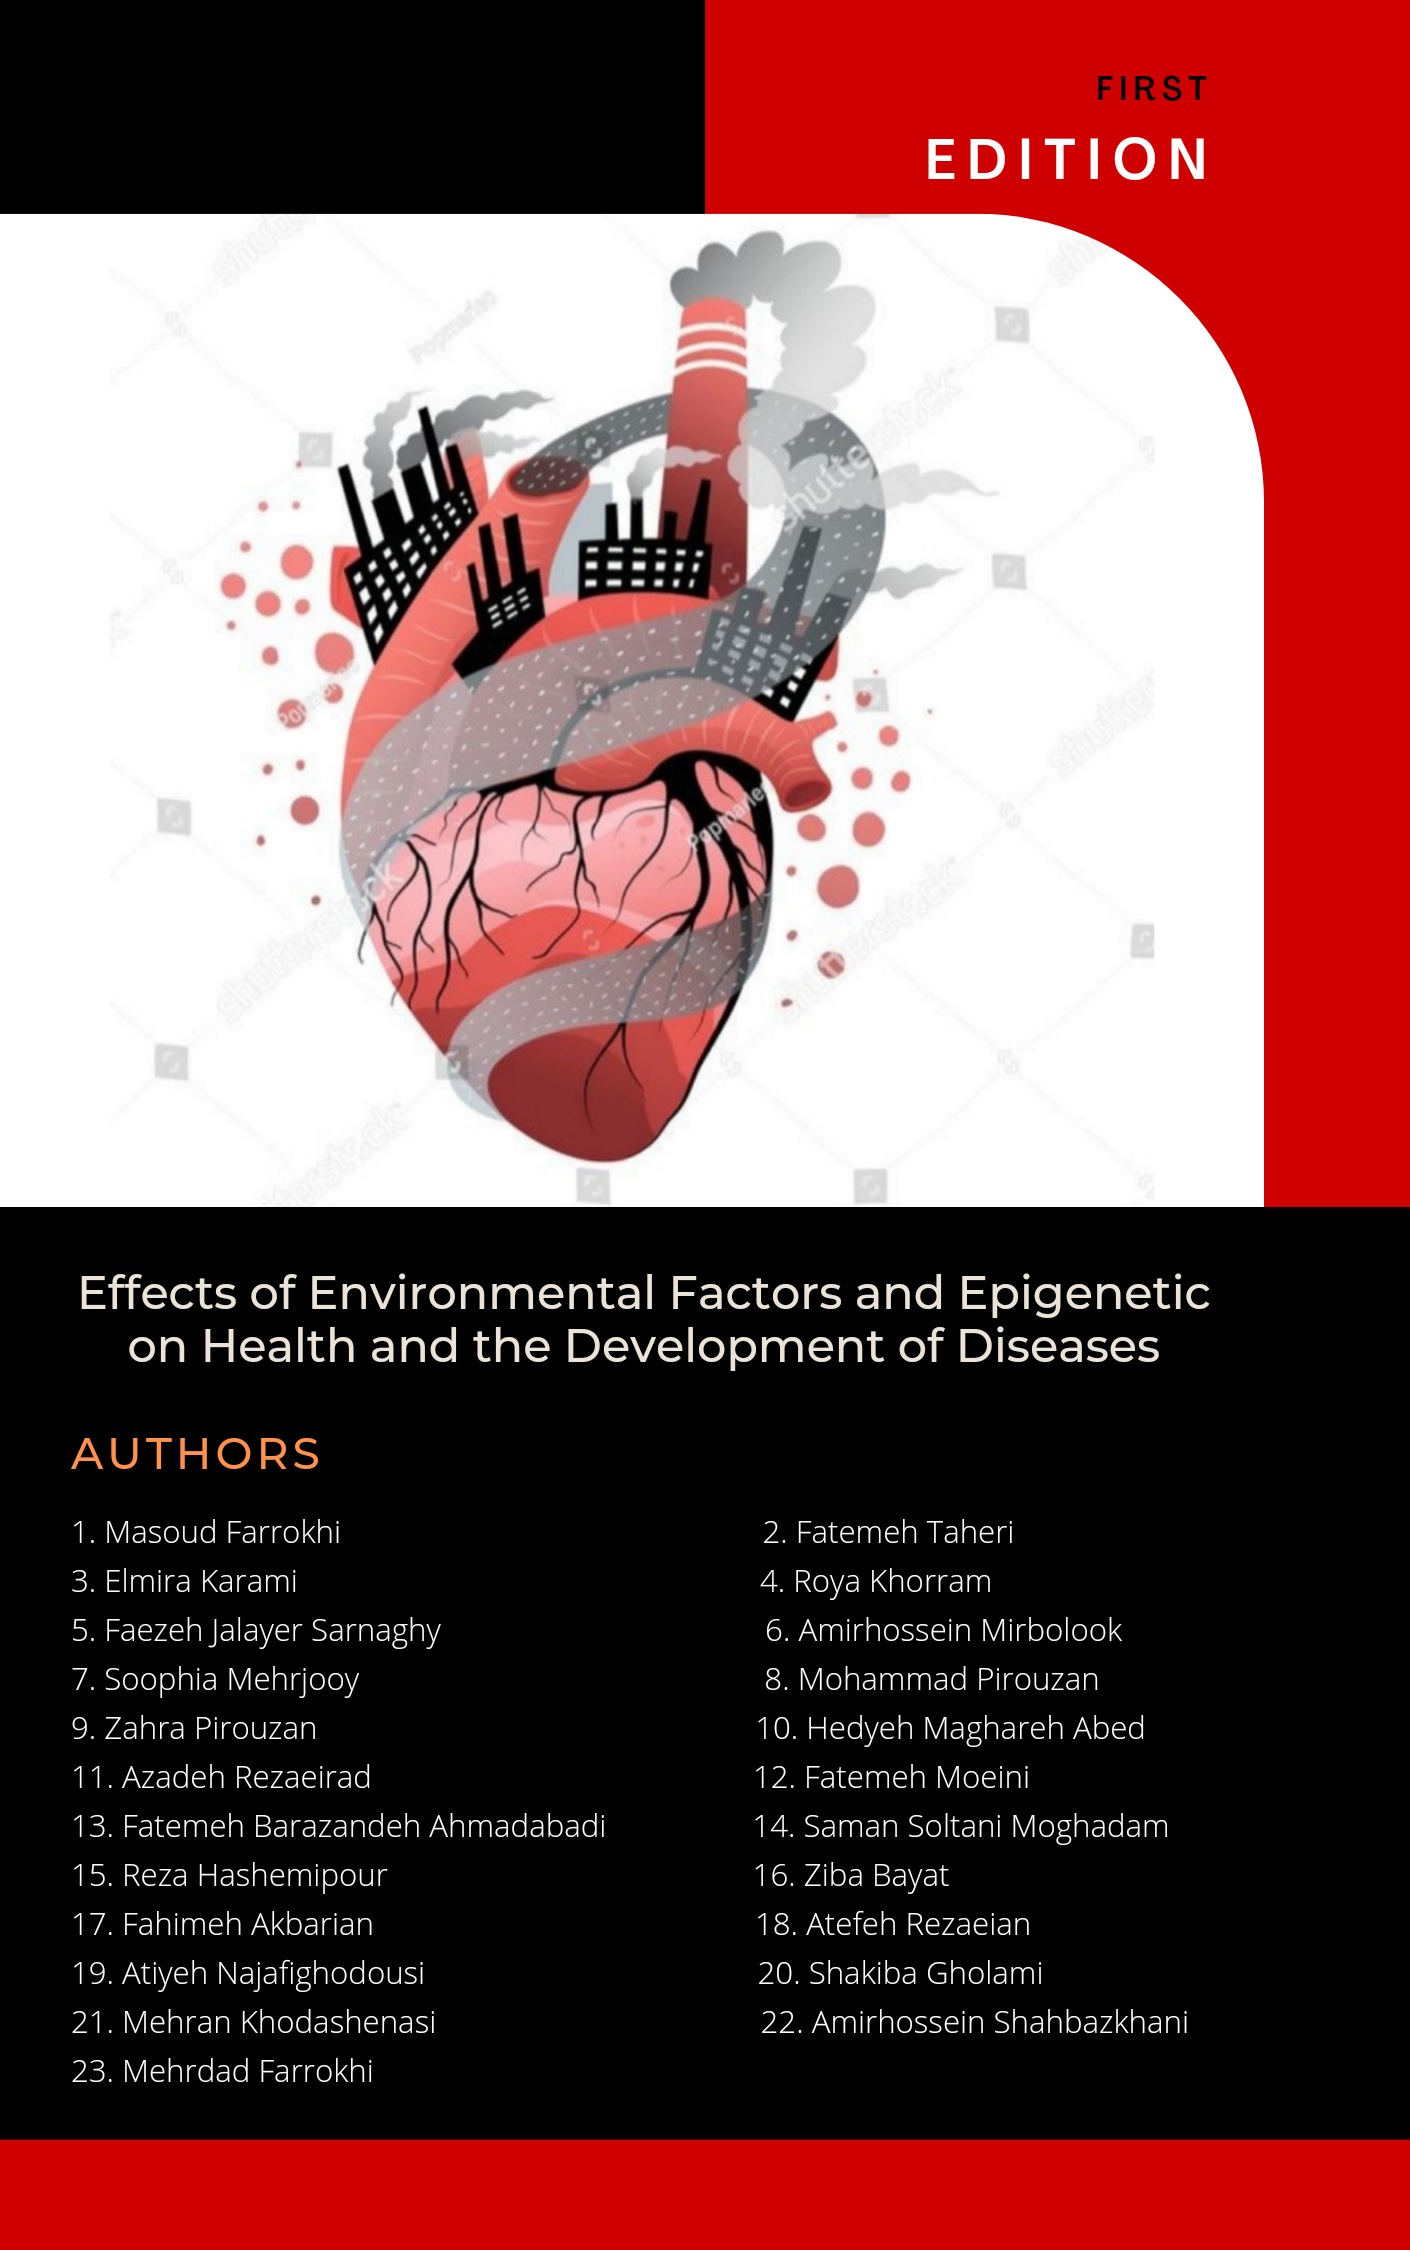 Effects of Environmental Factors and Epigenetic on Health and the Development of Diseases